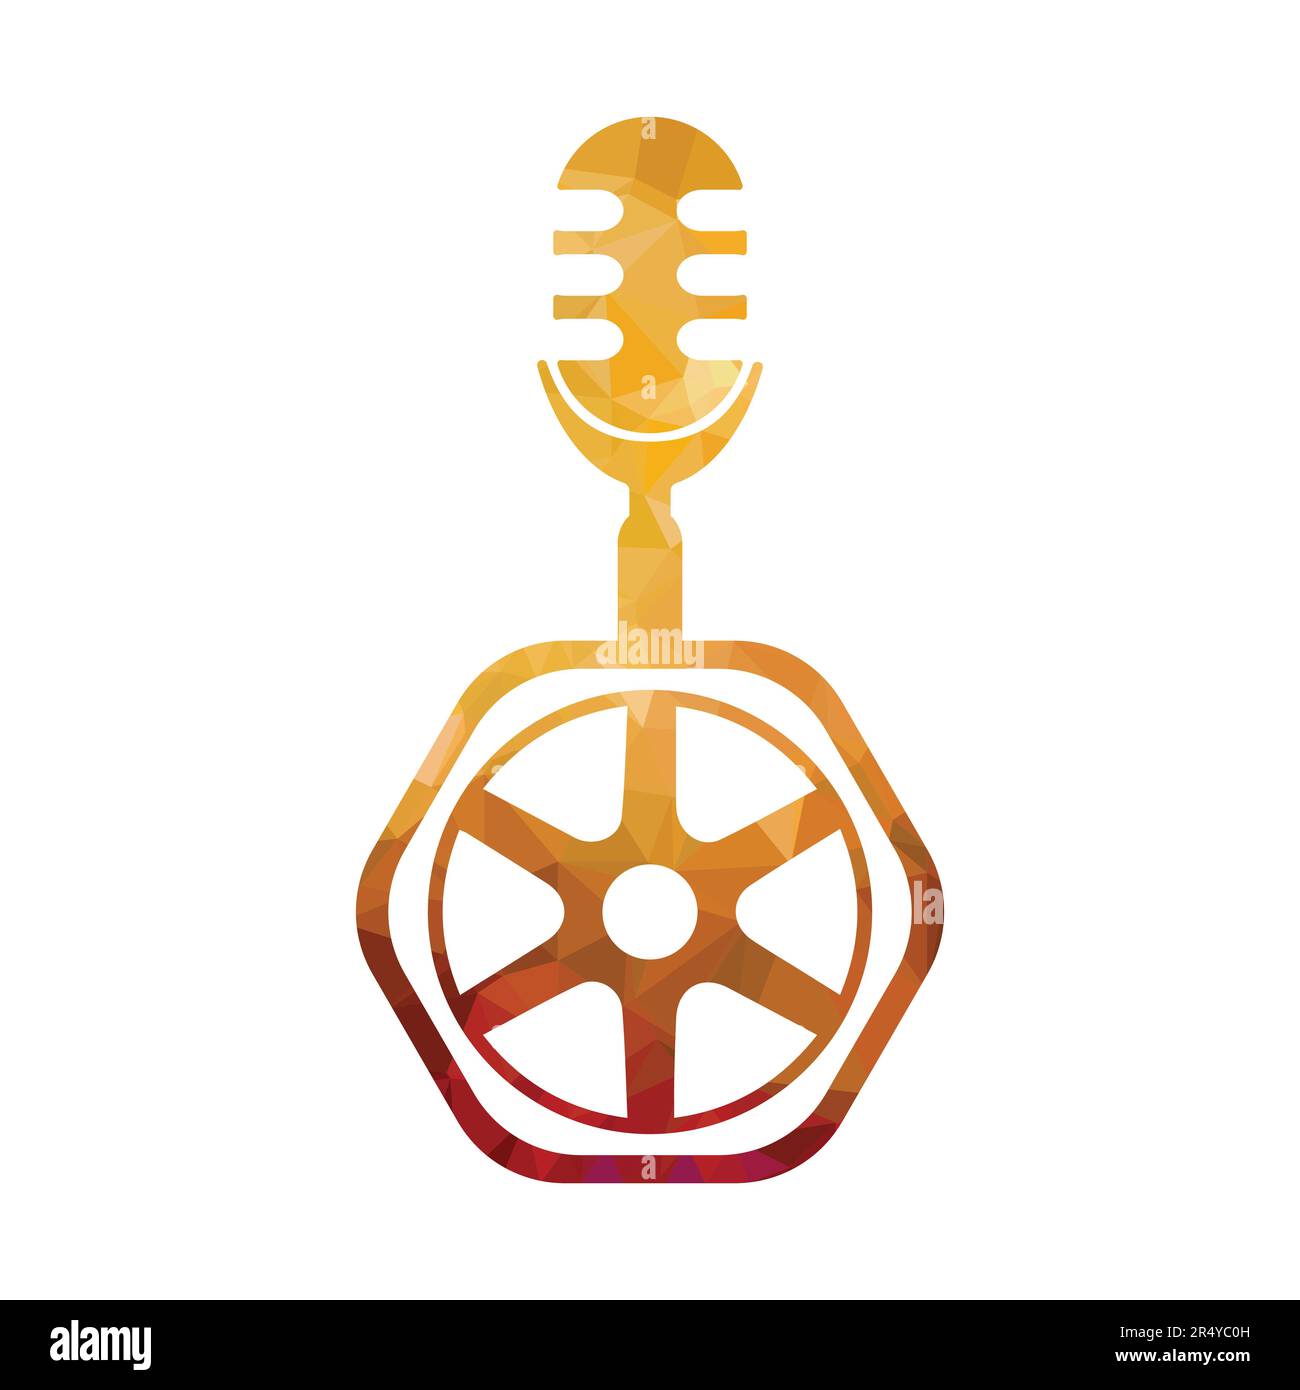 Podcast microphone with wheel vector illustration Stock Vector